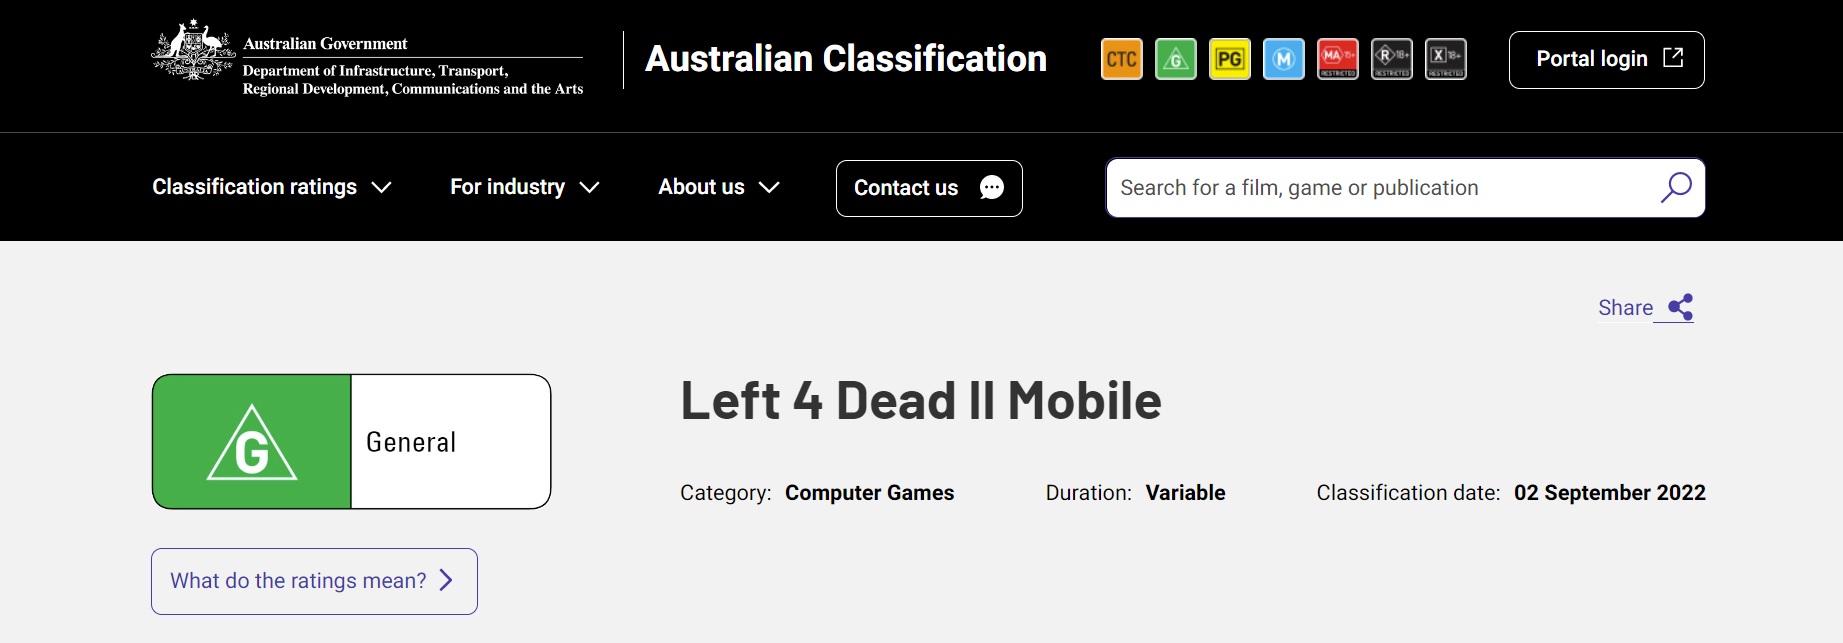 Left 4 Dead 2 Mobile is a scam: certification from Australia approving Left 4 Dead 2 for release on mobile